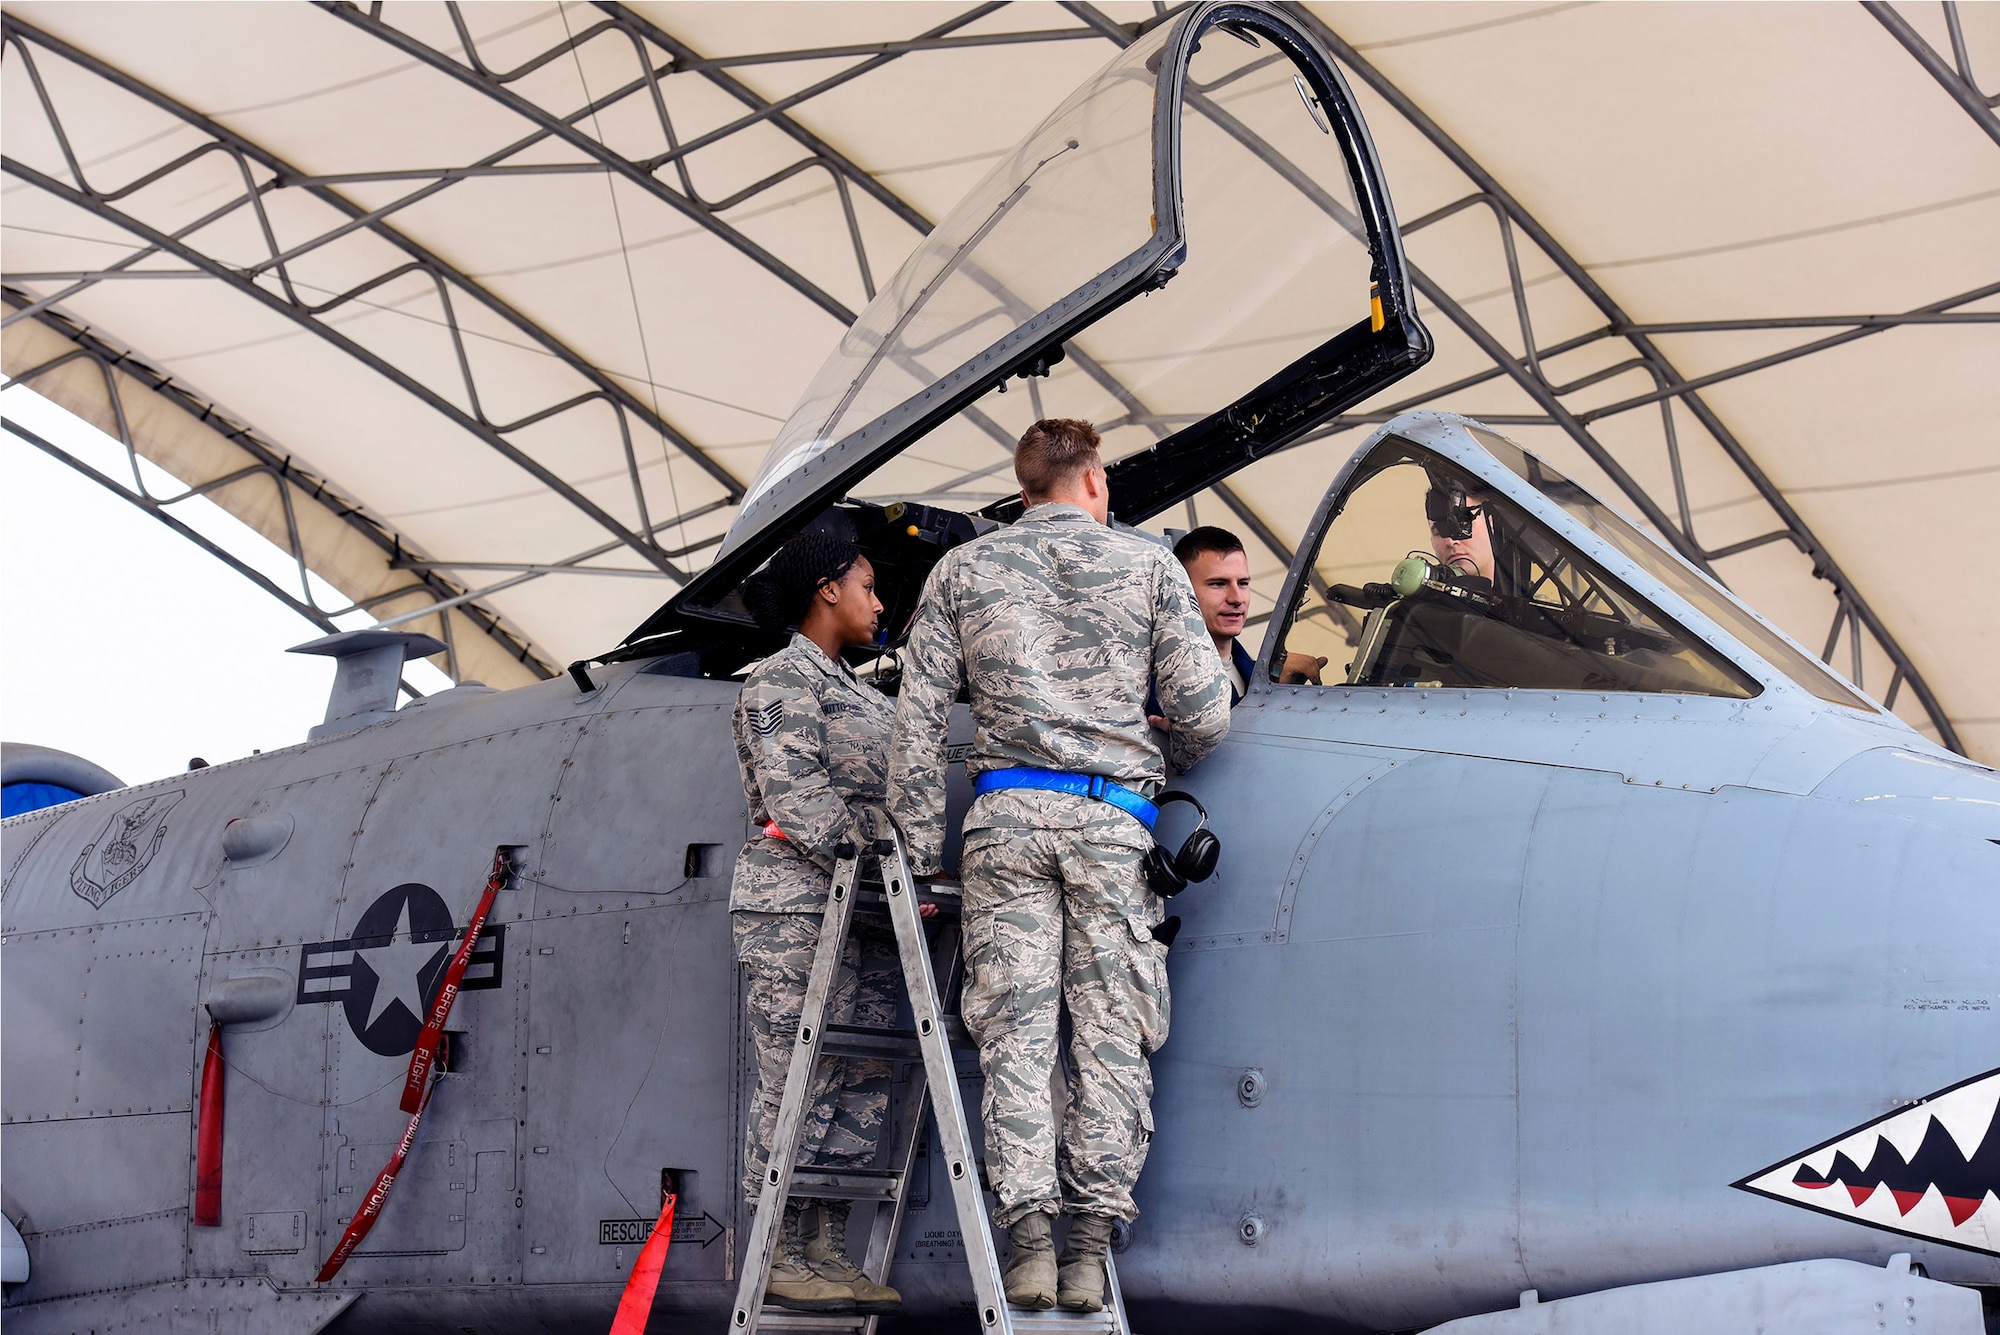 U.S. Air Force Senior Airman Anthony Long, 74th Aircraft Maintenance Unit avionics specialist, shows Emerge Moody Airmen the cockpit components of an A-10C Thunderbolt II, Oct. 6, 2016, at Moody Air Force Base, Ga. Emerge Moody’s first installment of the nine-month course involved a tour to the 23d Aircraft Maintenance Squadron to learn about the A-10 mission. (U.S. Air Force photo by Airman 1st Class Greg Nash)